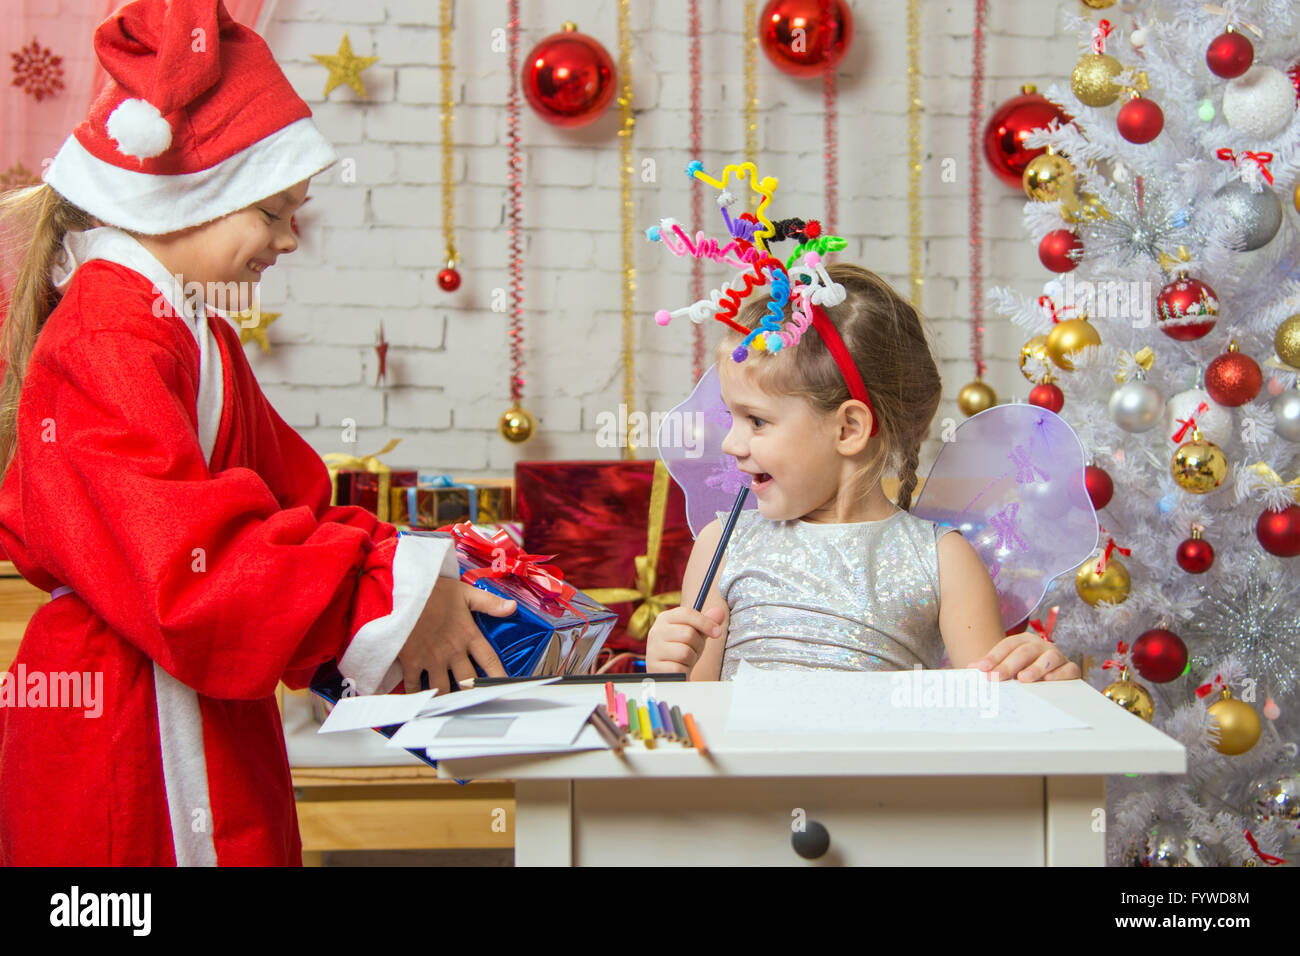 Girl sits at a table with fireworks on the head, Santa Claus gave her a gift Stock Photo